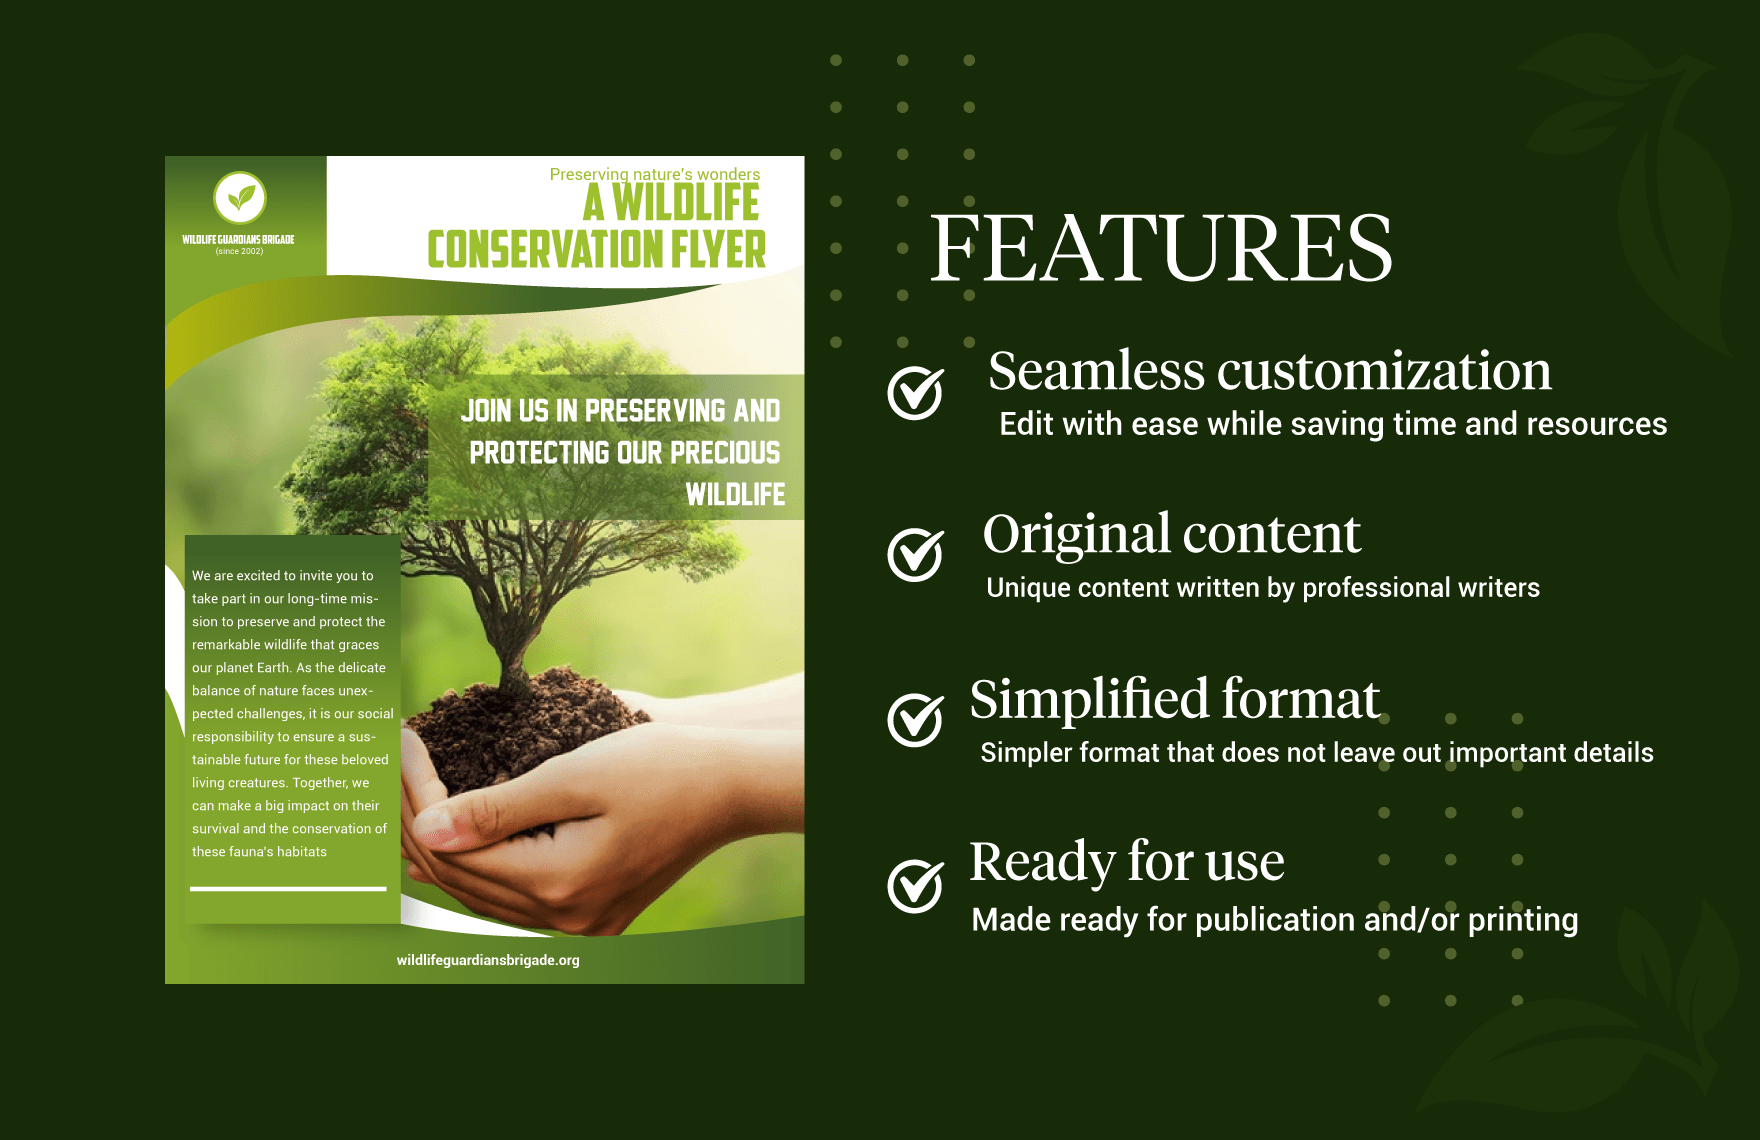 Nature Flyer Template